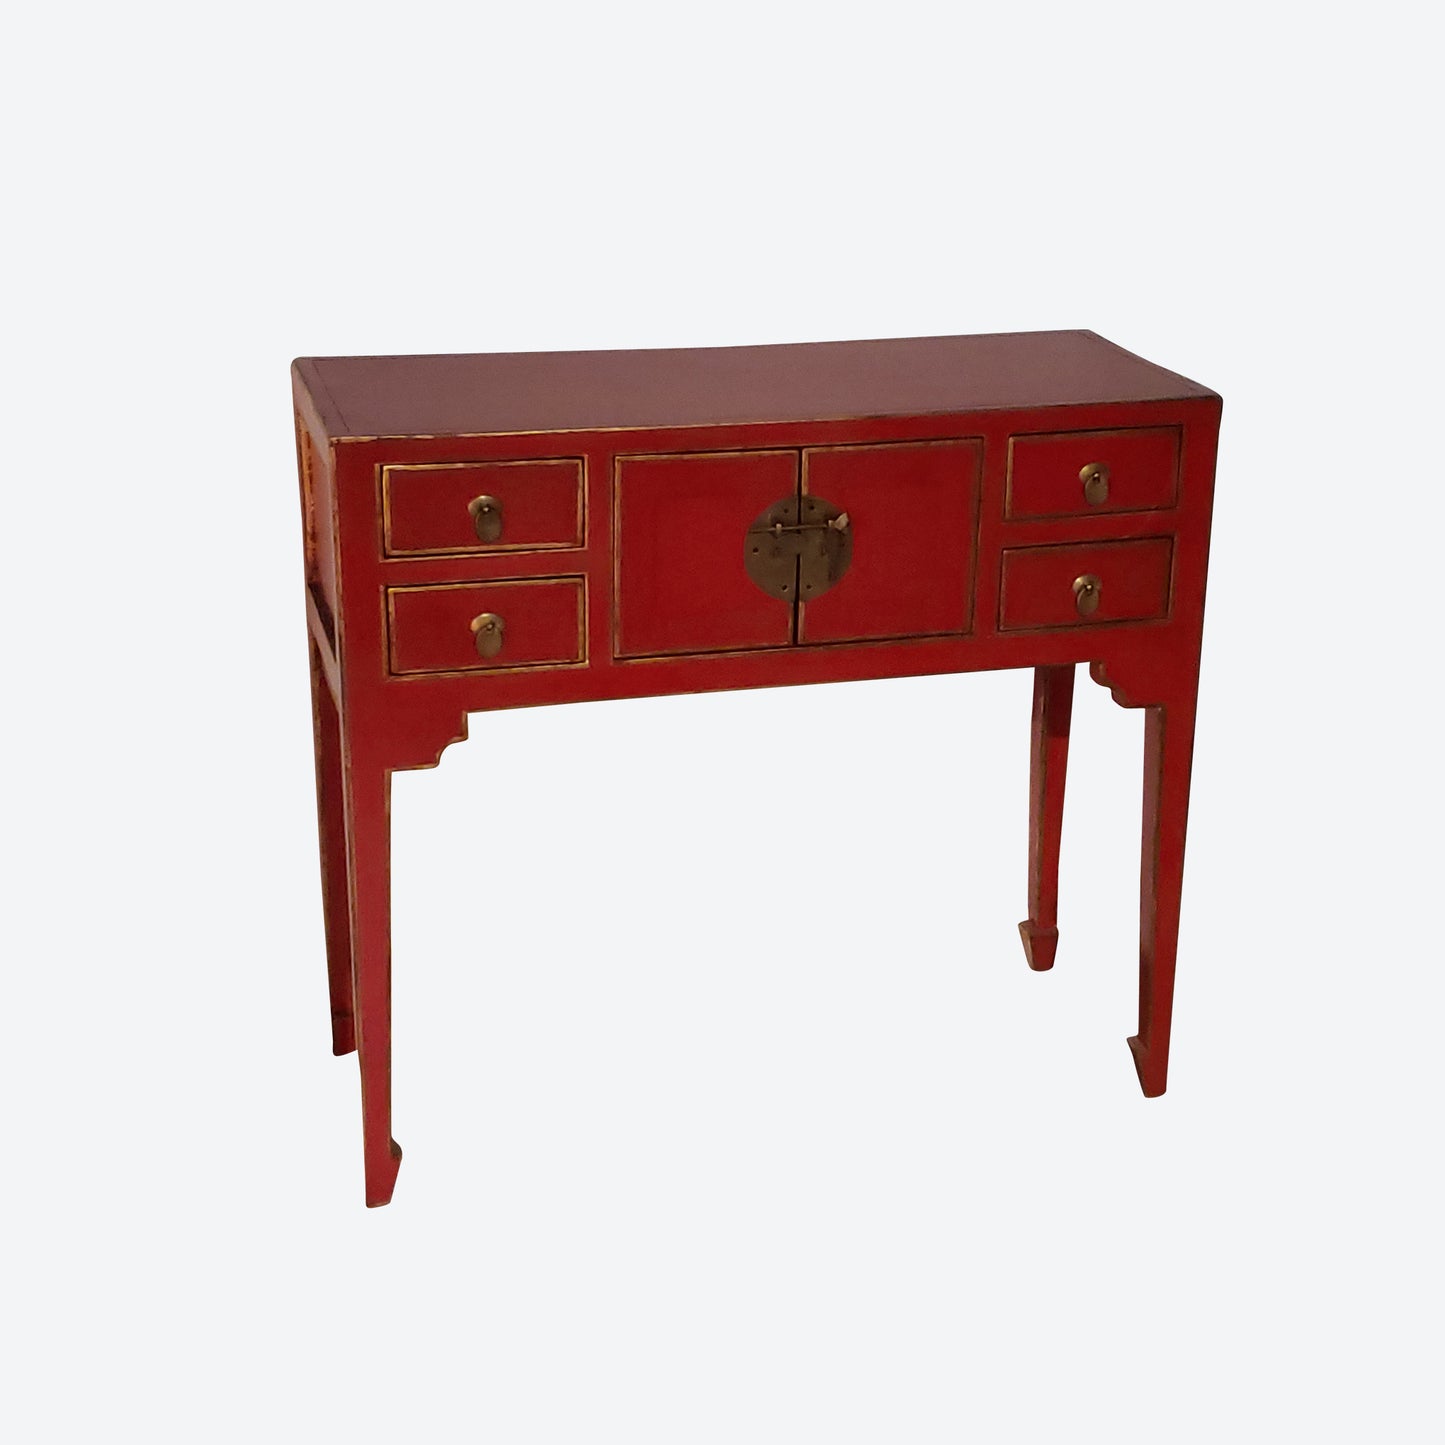 Red Center Console Table With Gold Accents And Key Hardware -SK- SKU 1139